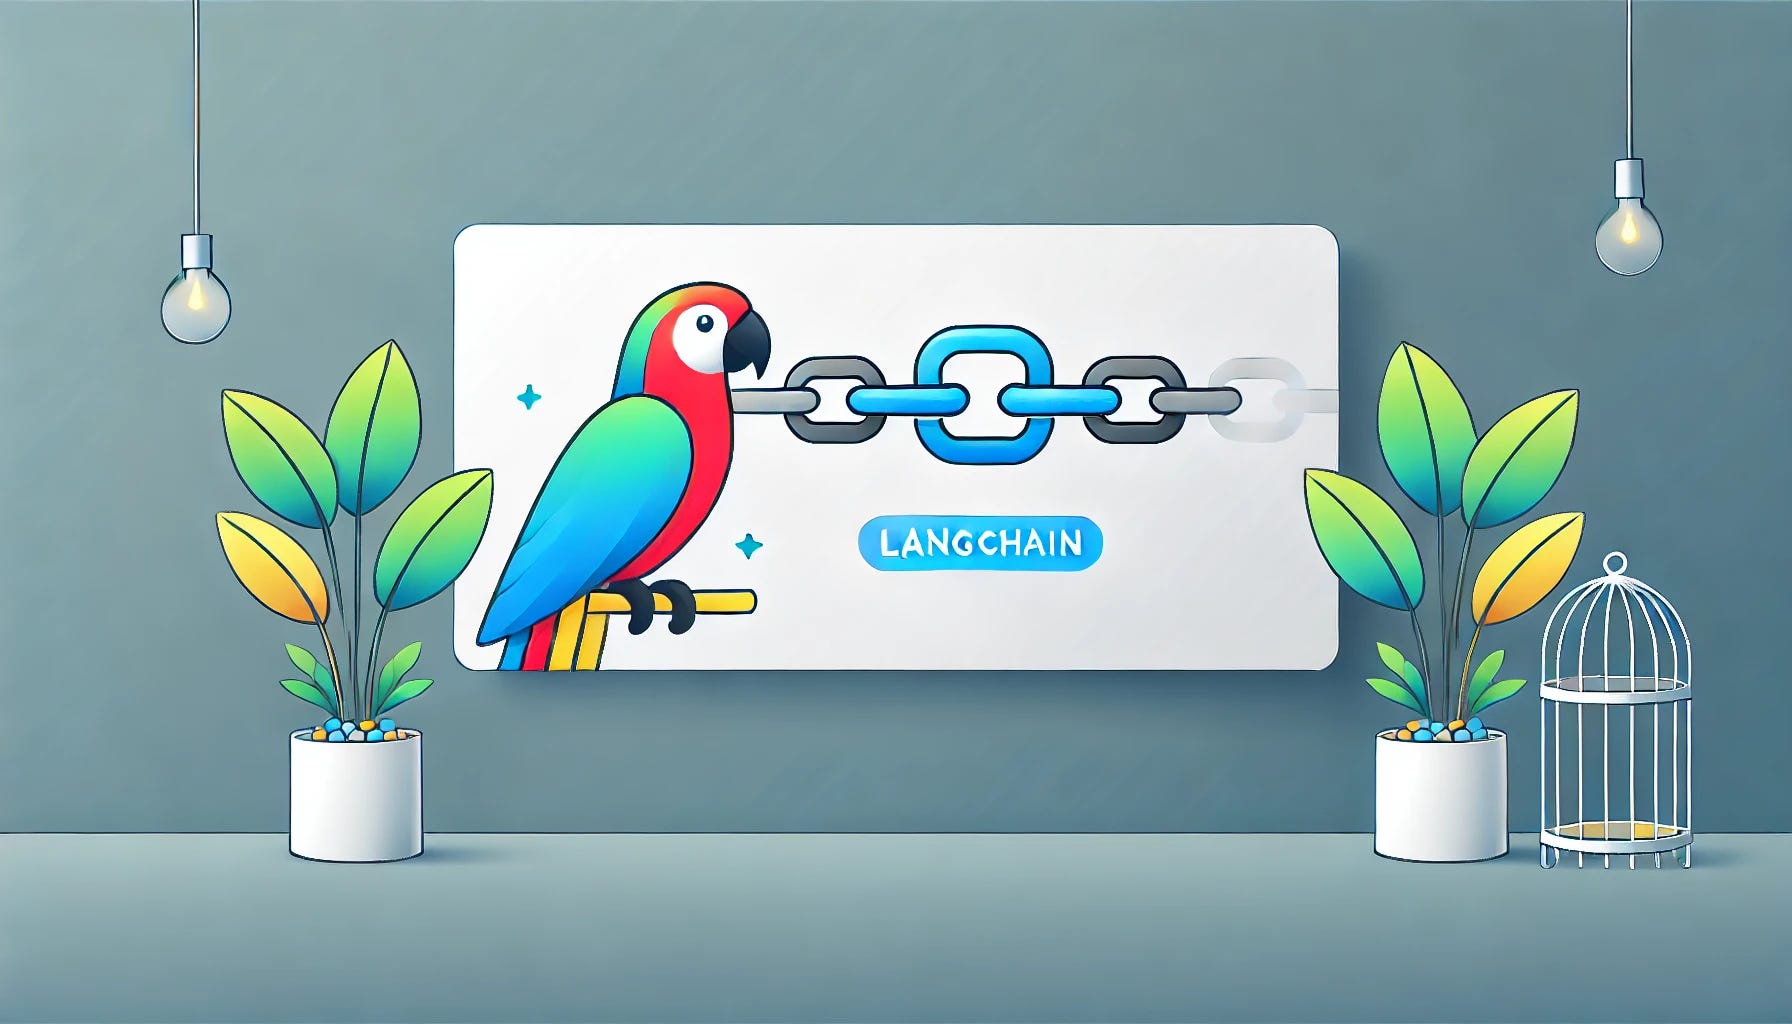 Hands on LangChain: Chains (Part 3)